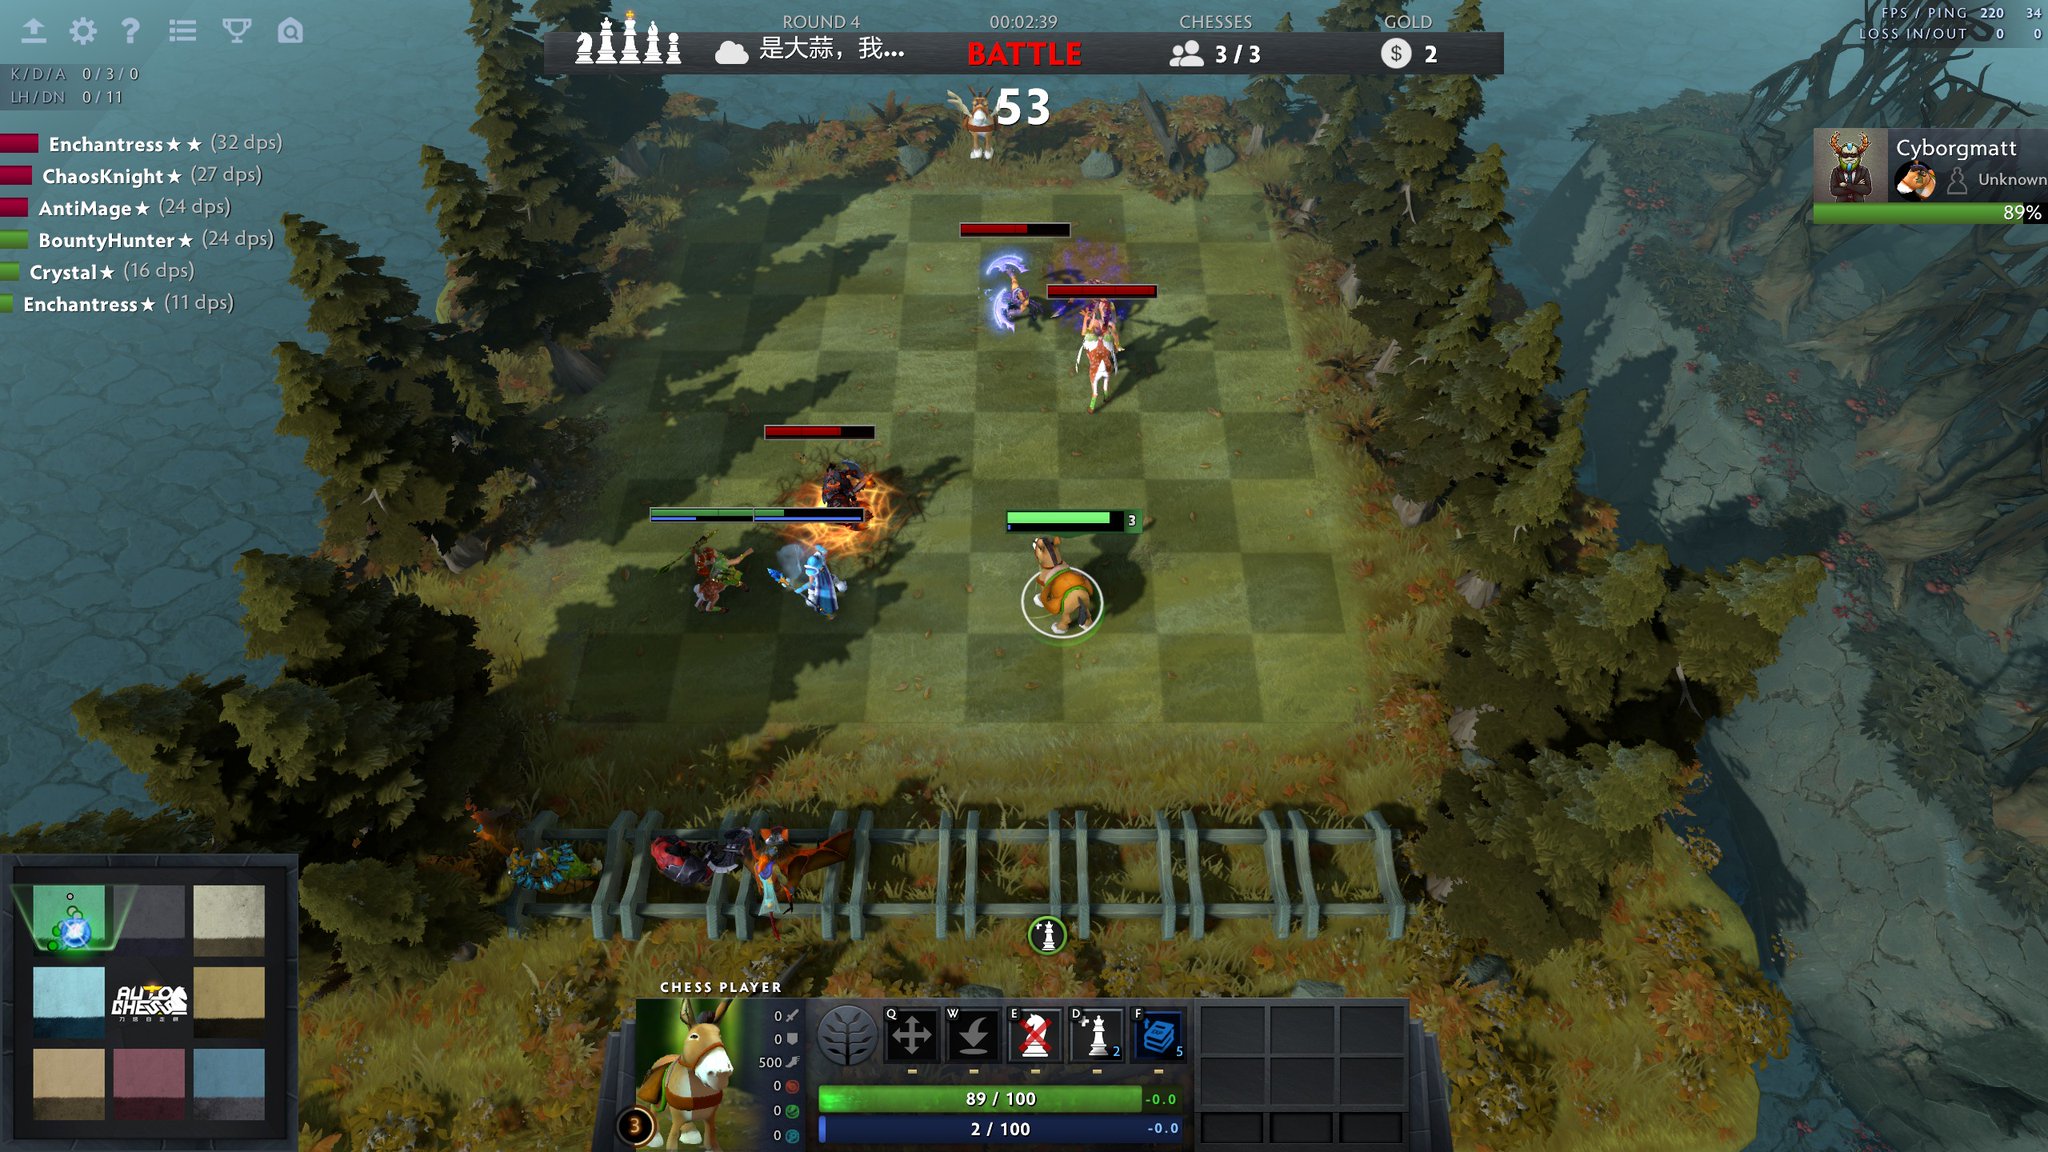 DOTA 2 Auto Chess' Comes to Mobile: How to Download Viral